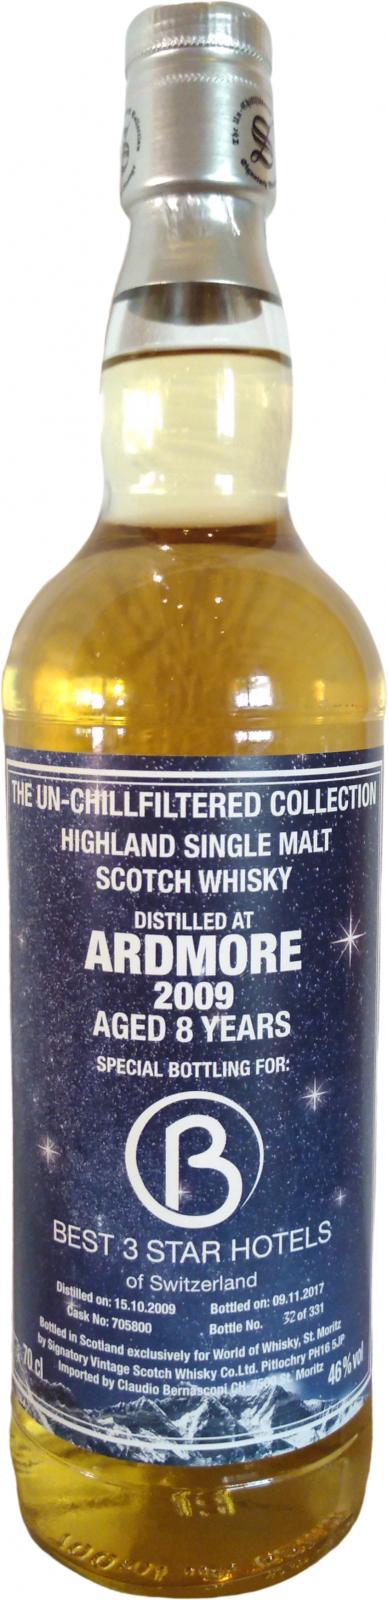 Ardmore 2009 SV The Un-Chillfiltered Collection #705800 Best 3 Star Hotels of Switzerland 46% 700ml